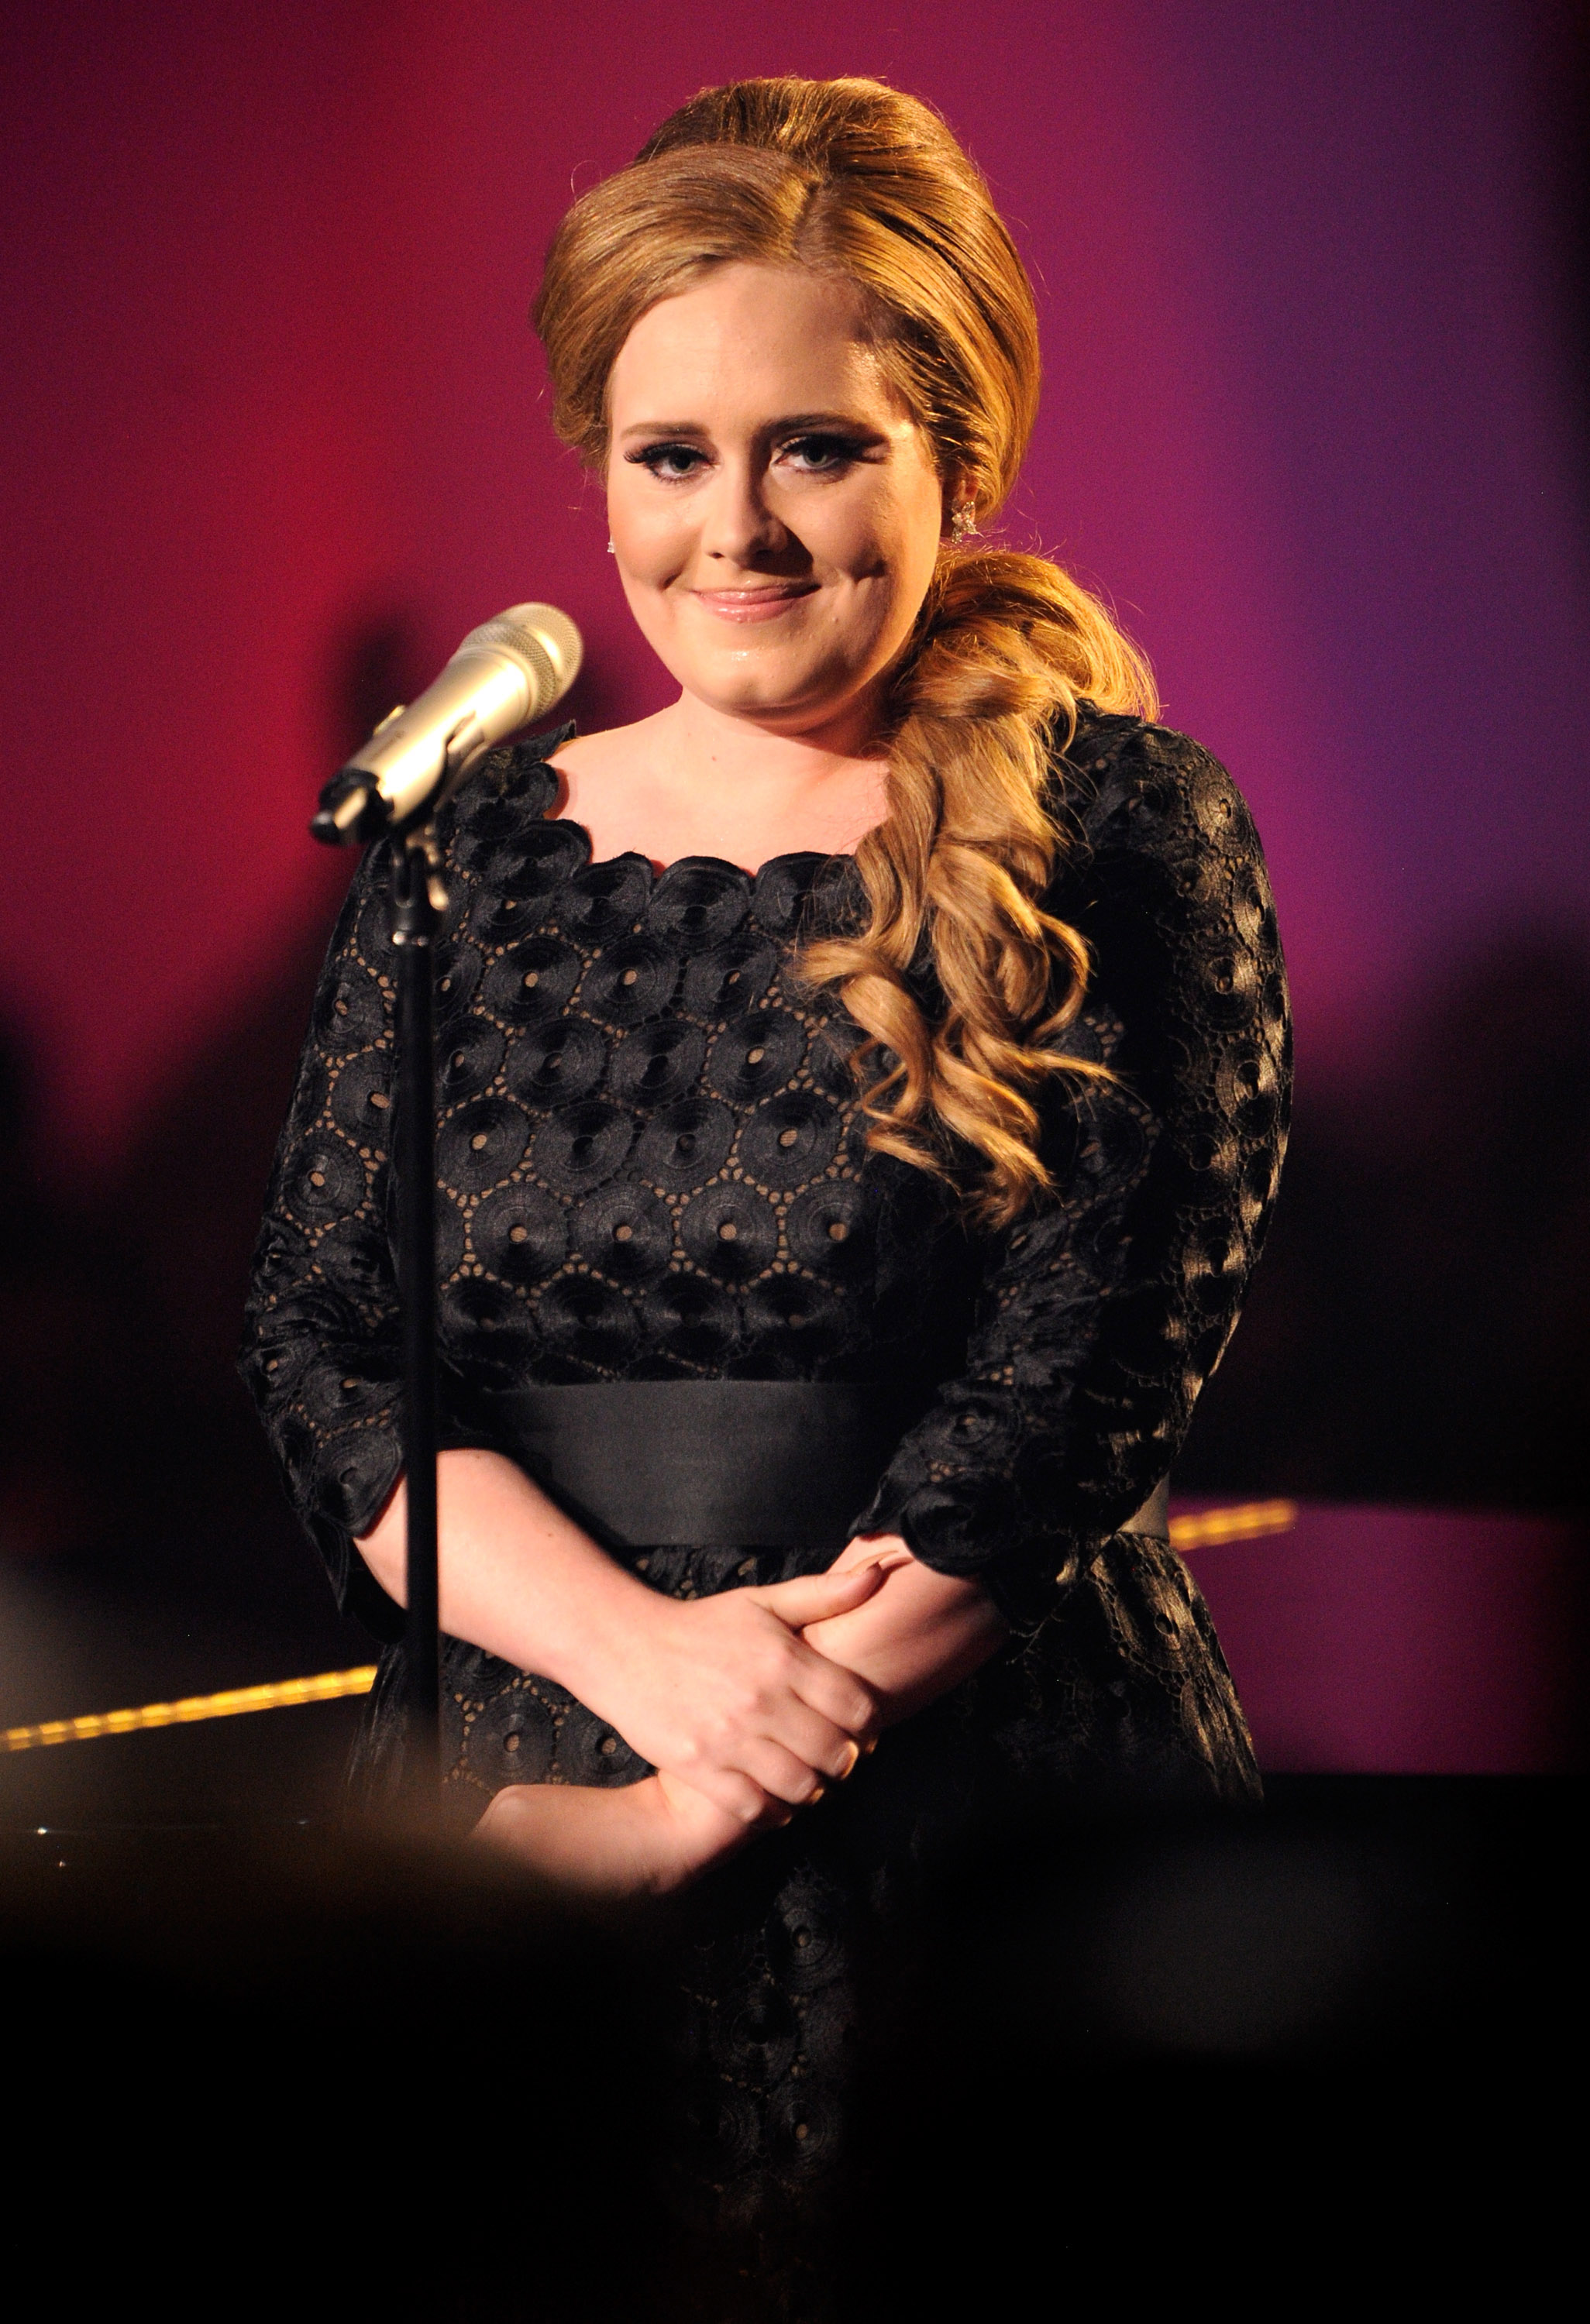 Adele performs on stage at the The 28th Annual MTV Video Music Awards at Nokia Theatre L.A. LIVE in Los Angeles on Aug. 28, 2011.